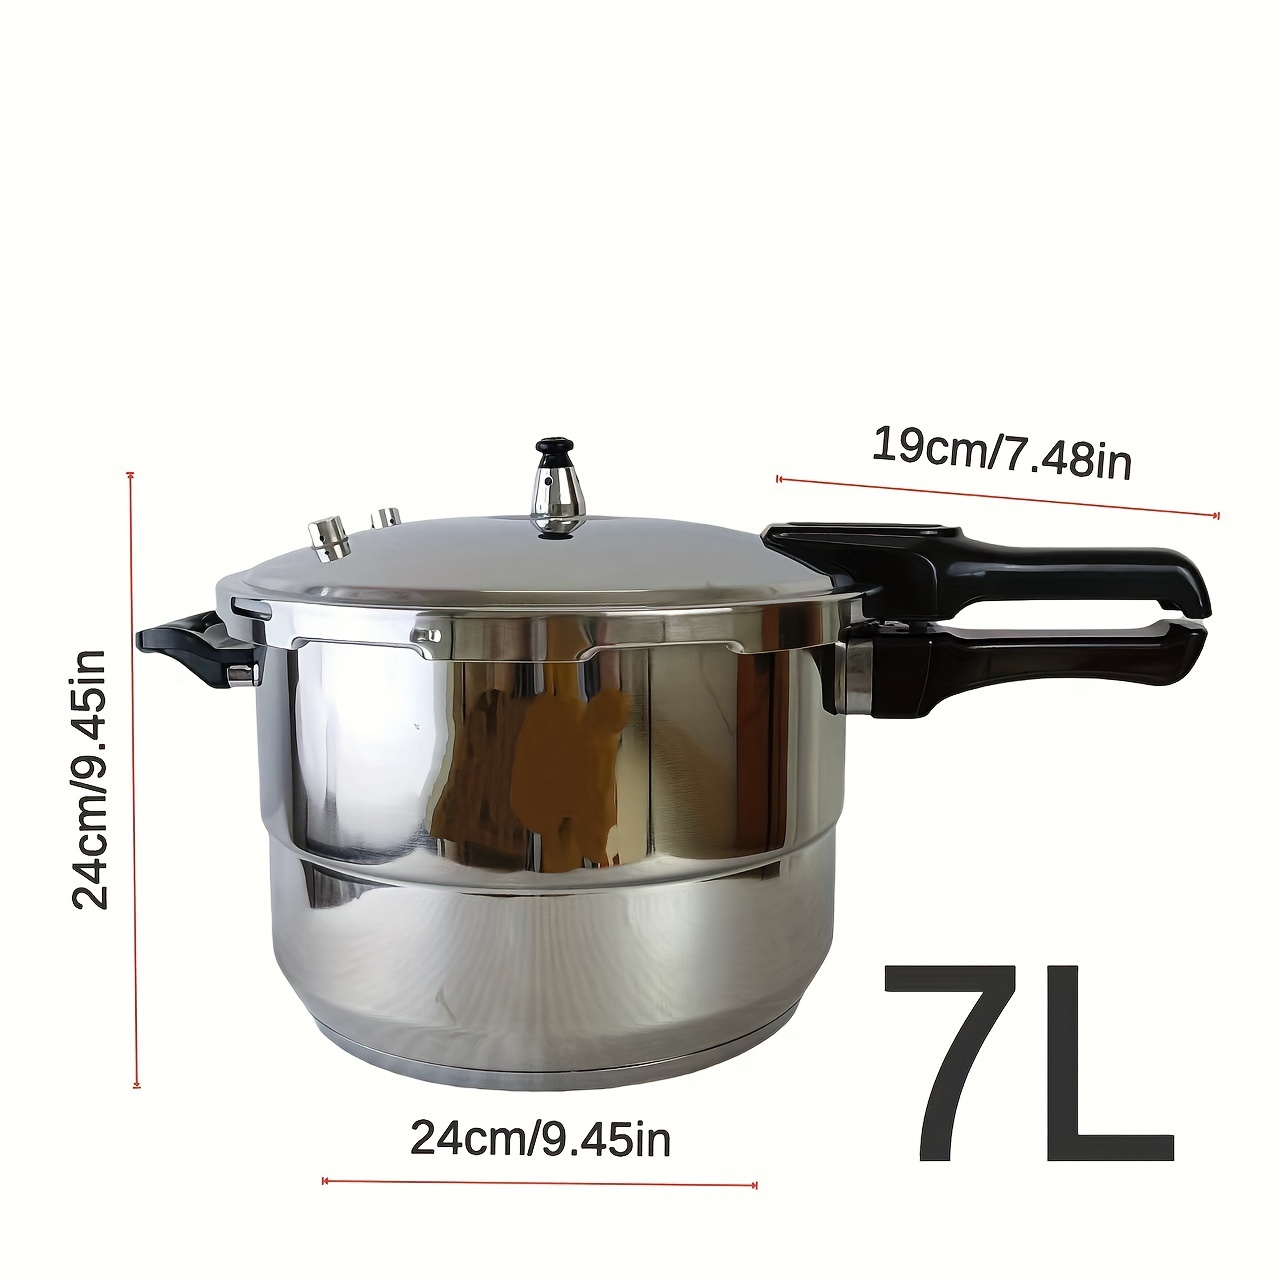 Commercial pressure cooker gas/induction cooker universal large capacity  pressure cooker home restaurant kitchen explosion-proof pressure cooker  (Size